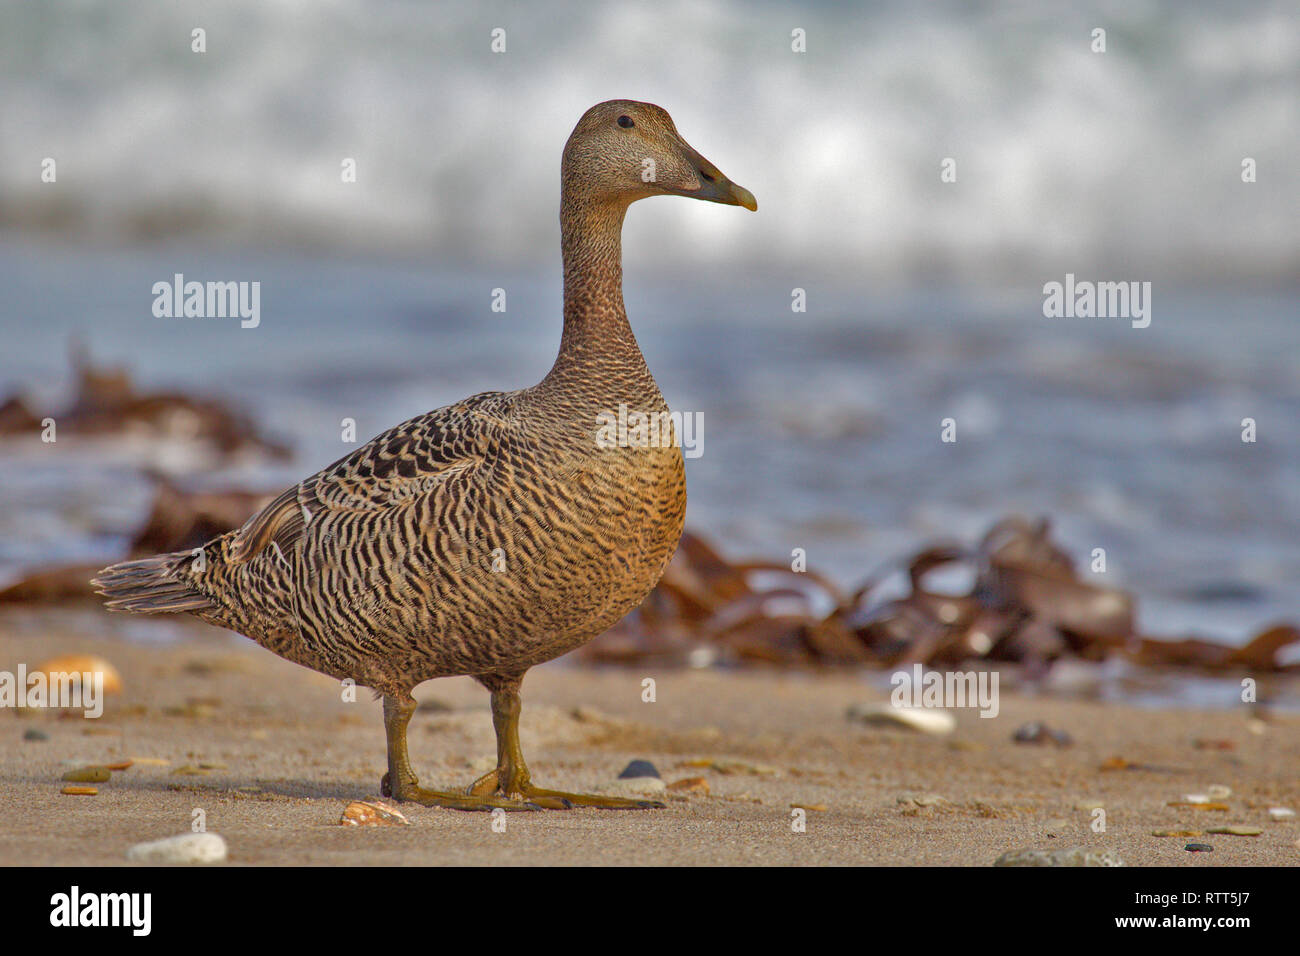 A female Common Eider at the beach of Helgioland Stock Photo